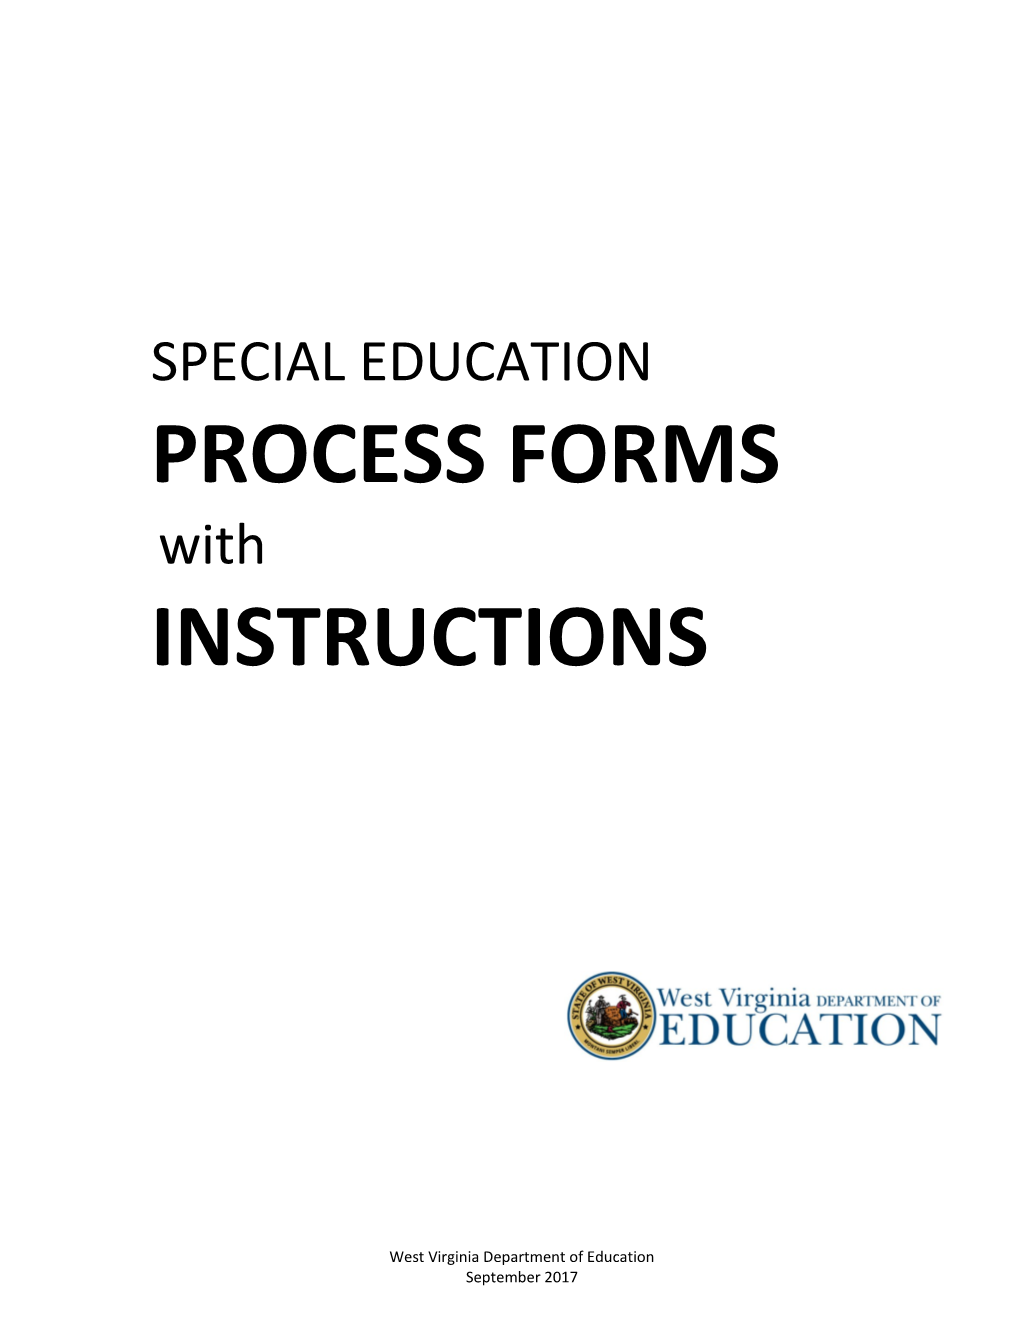 Special Education Process Forms